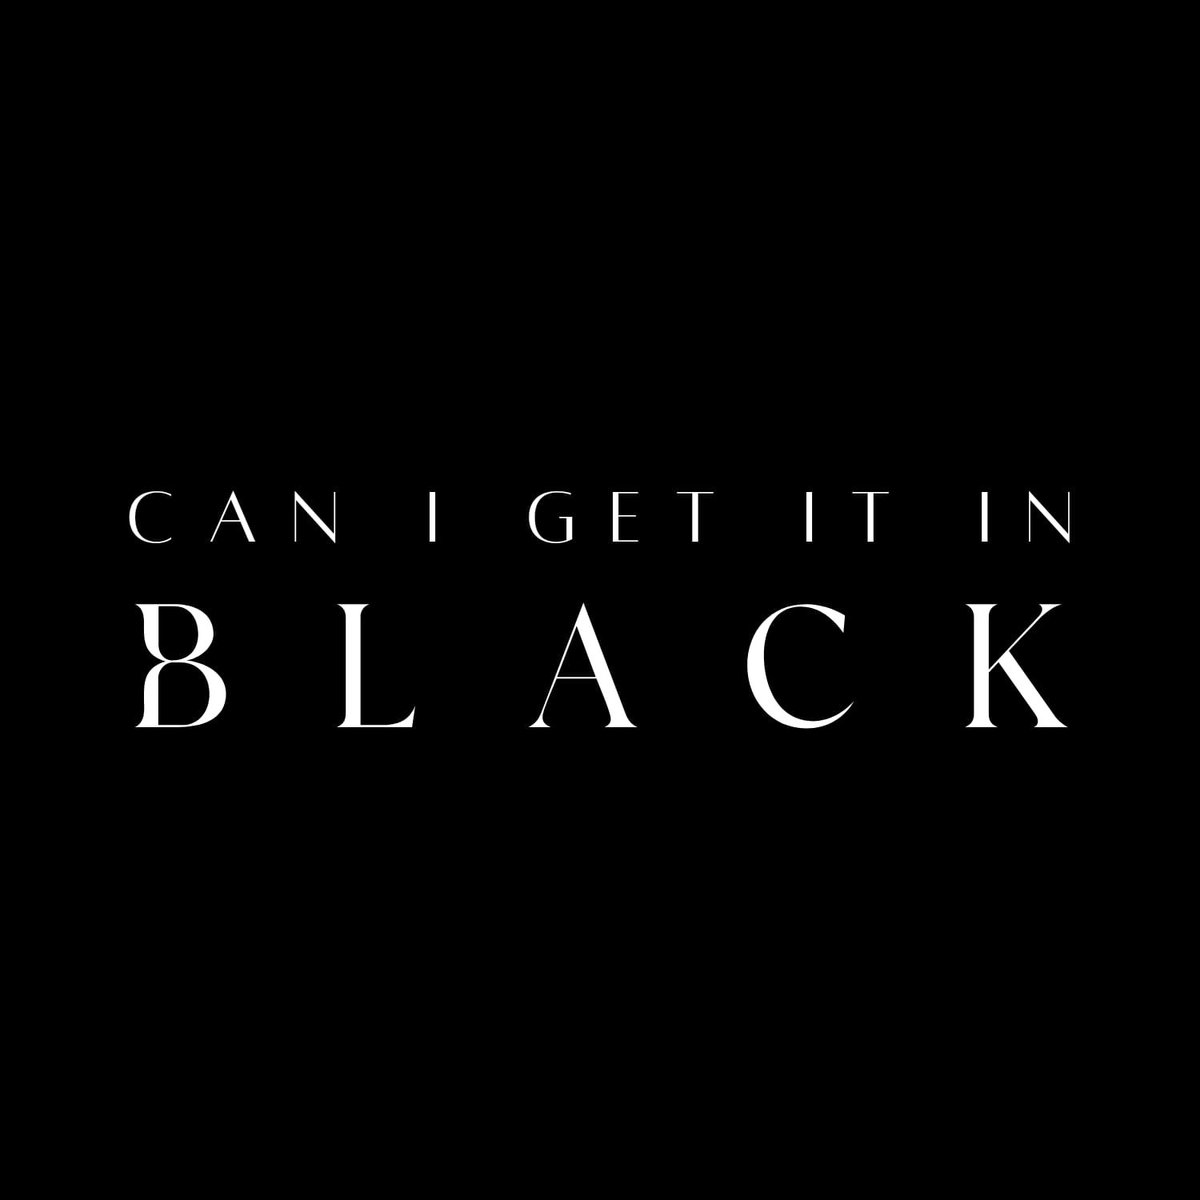 CAN I GET IT IN BLACK 🖤🖤🖤 wishes everyone a MERRY CHRISTMAS 🎄 #canigetitinblack #Black #BlackProducts #AllBlackEverything #NewWebsiteLaunch #MerryChristmas